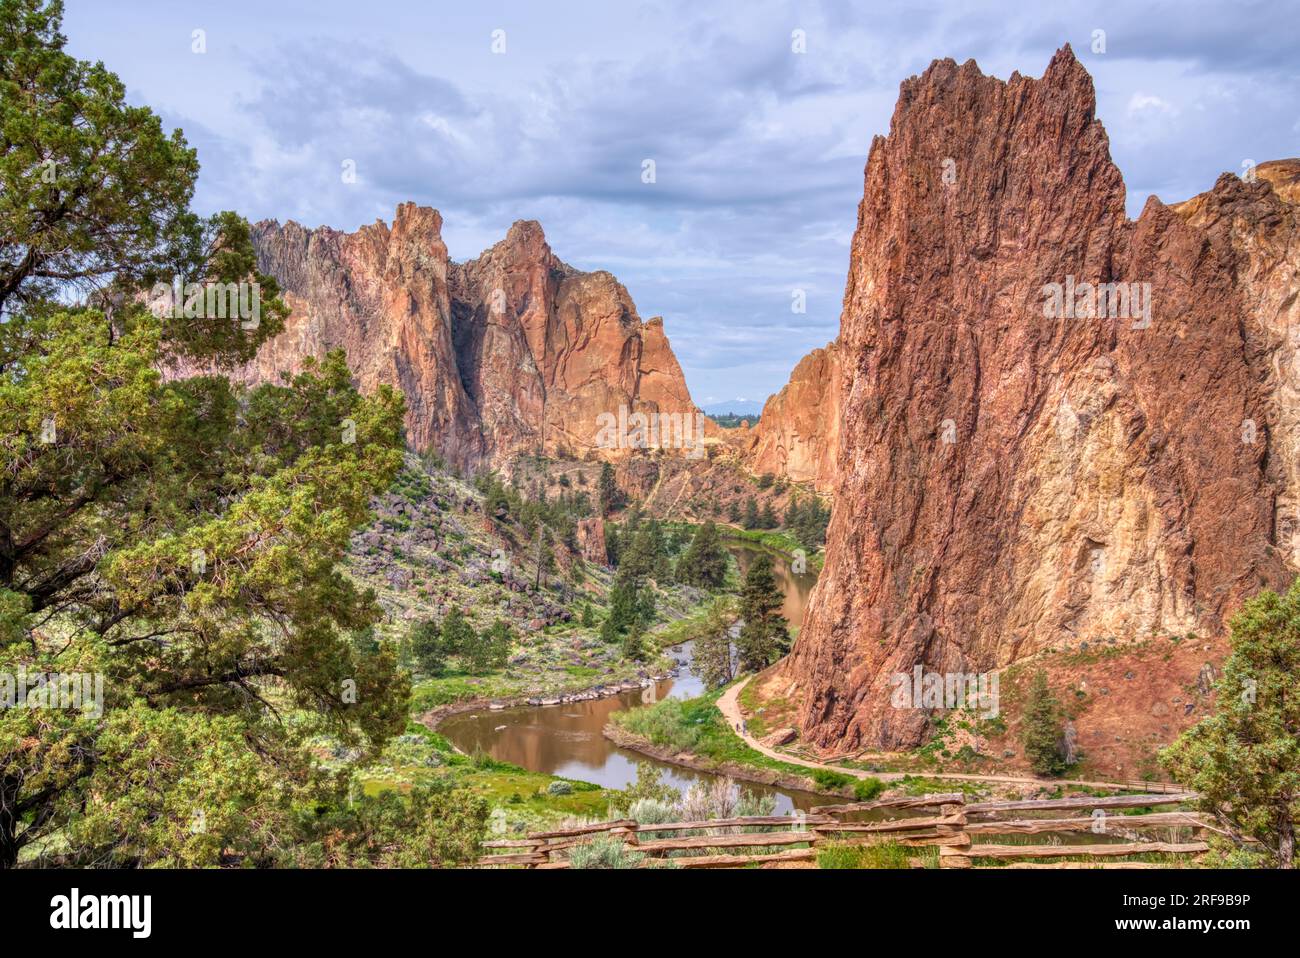 Amazing rock formations at Smith Rock State Park near Redmond, Oregon Stock Photo